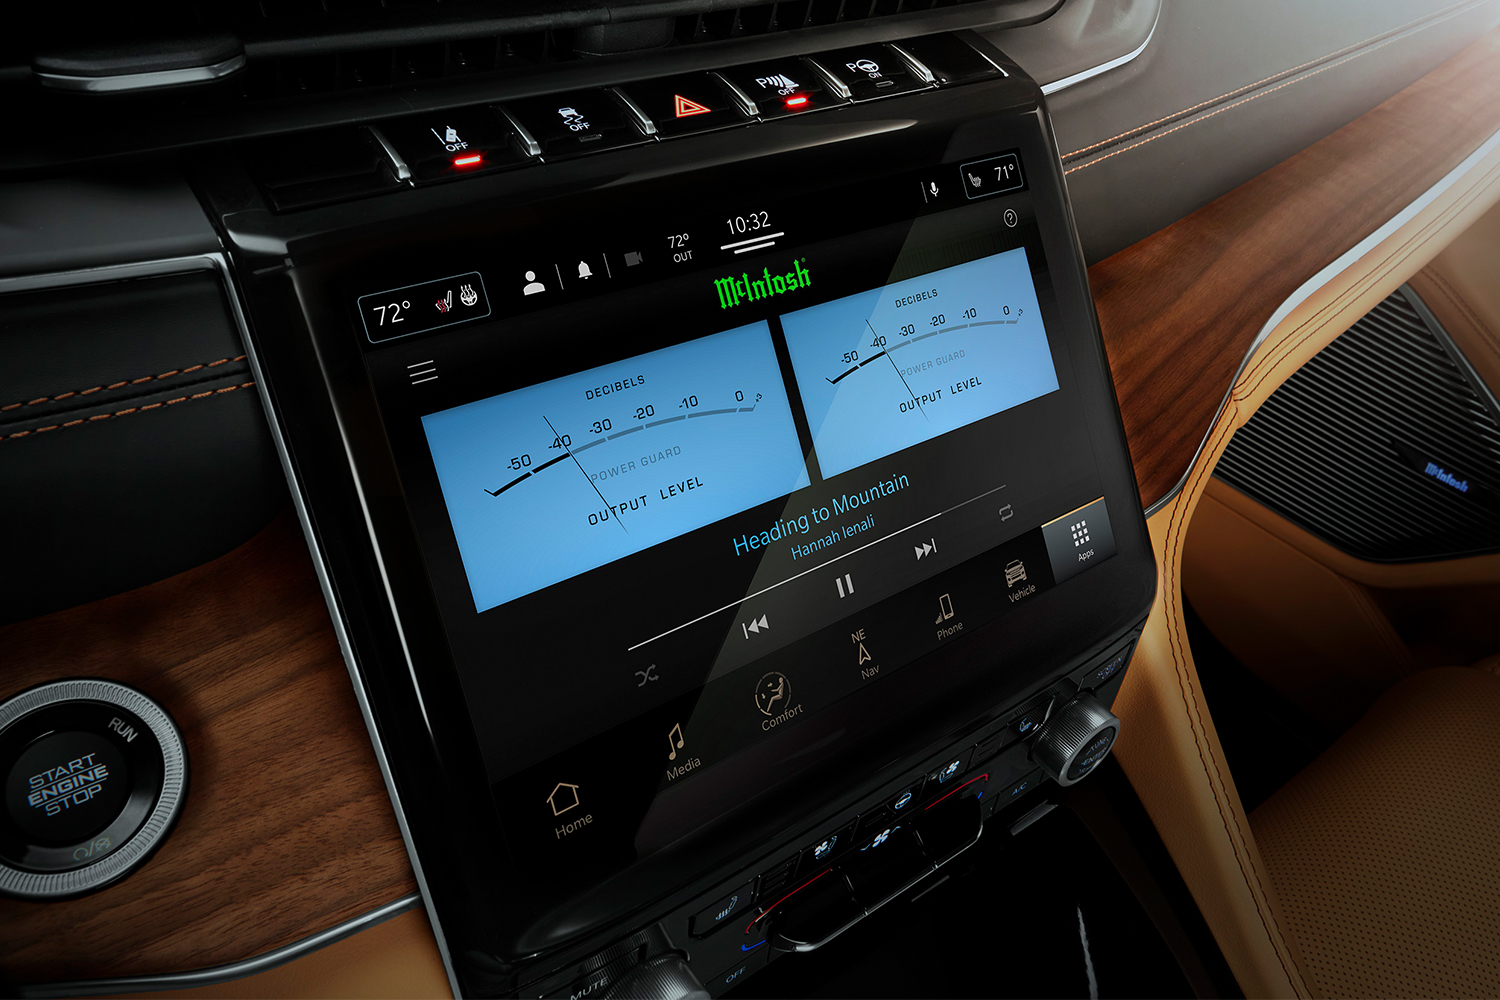 The McIntosh Laboratory sound system in the new Jeep Grand Wagoneer